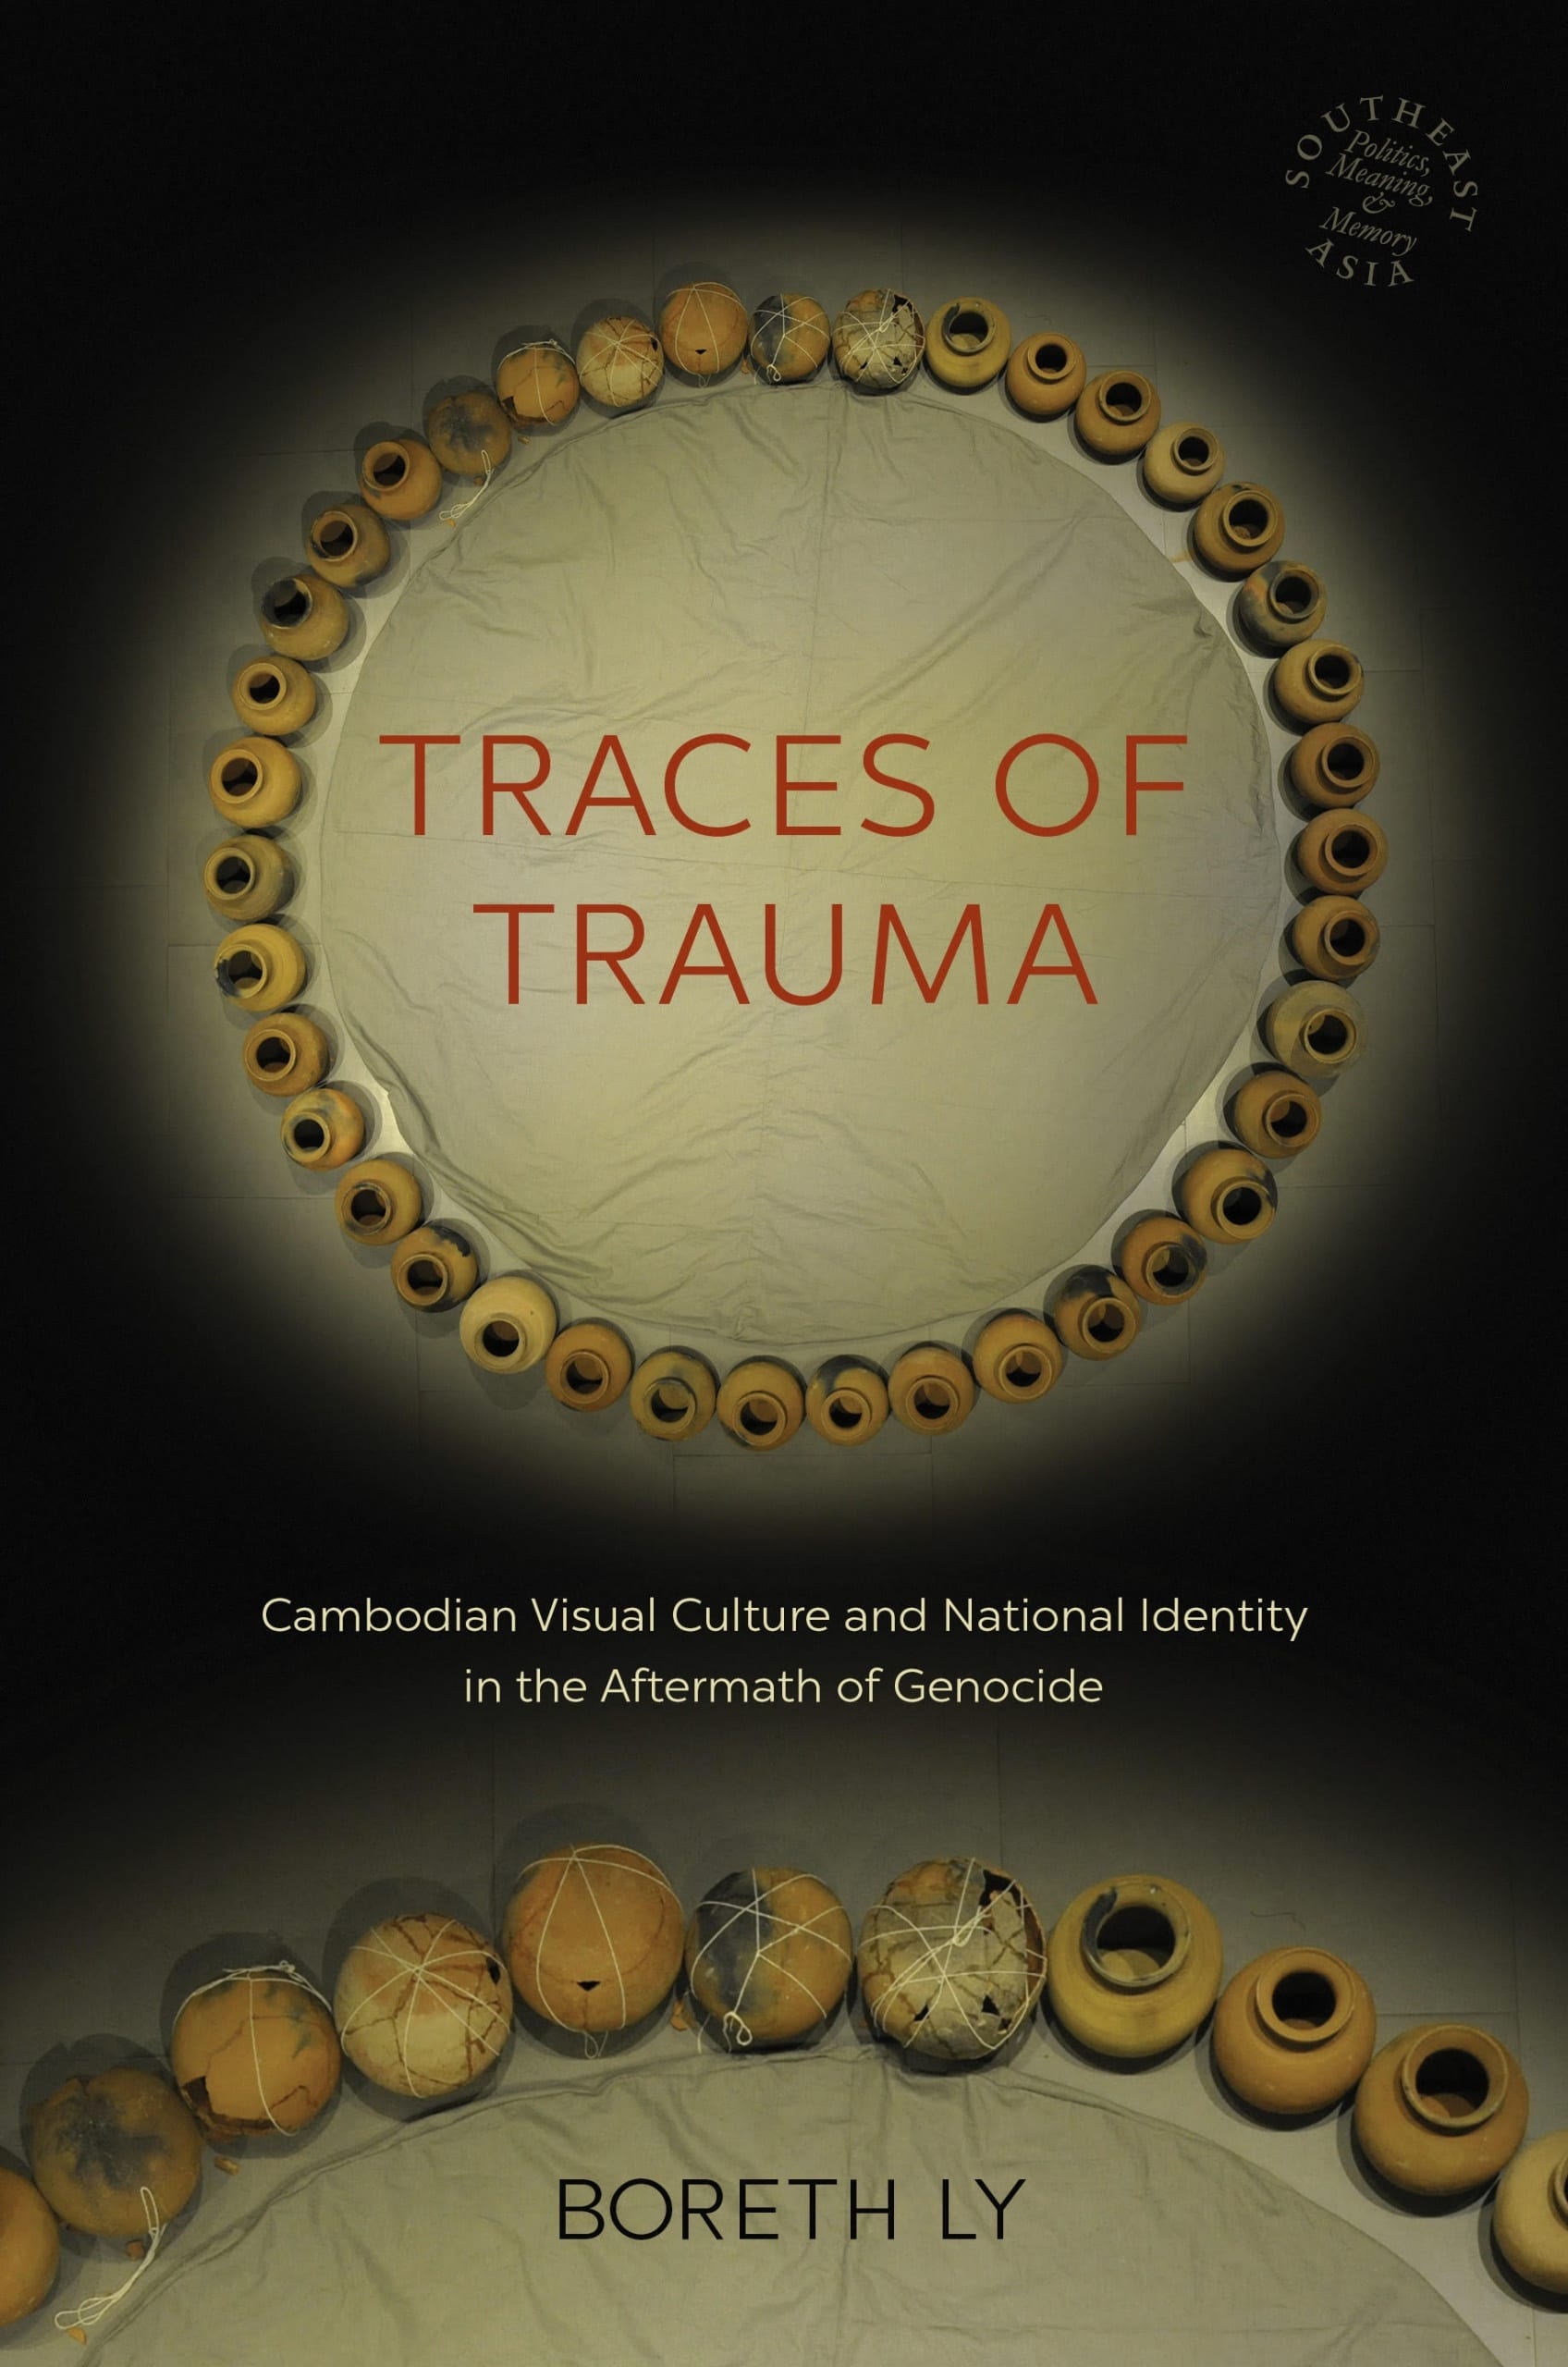 Cover of book by Boreth Ly featuring a color photograph of forty clay pots arranged in a circle. Situated in the middle of the circle is the book’s title written in red, Traces of Trauma: Cambodian Visual Culture and National Identity in the Aftermath of Genocide.